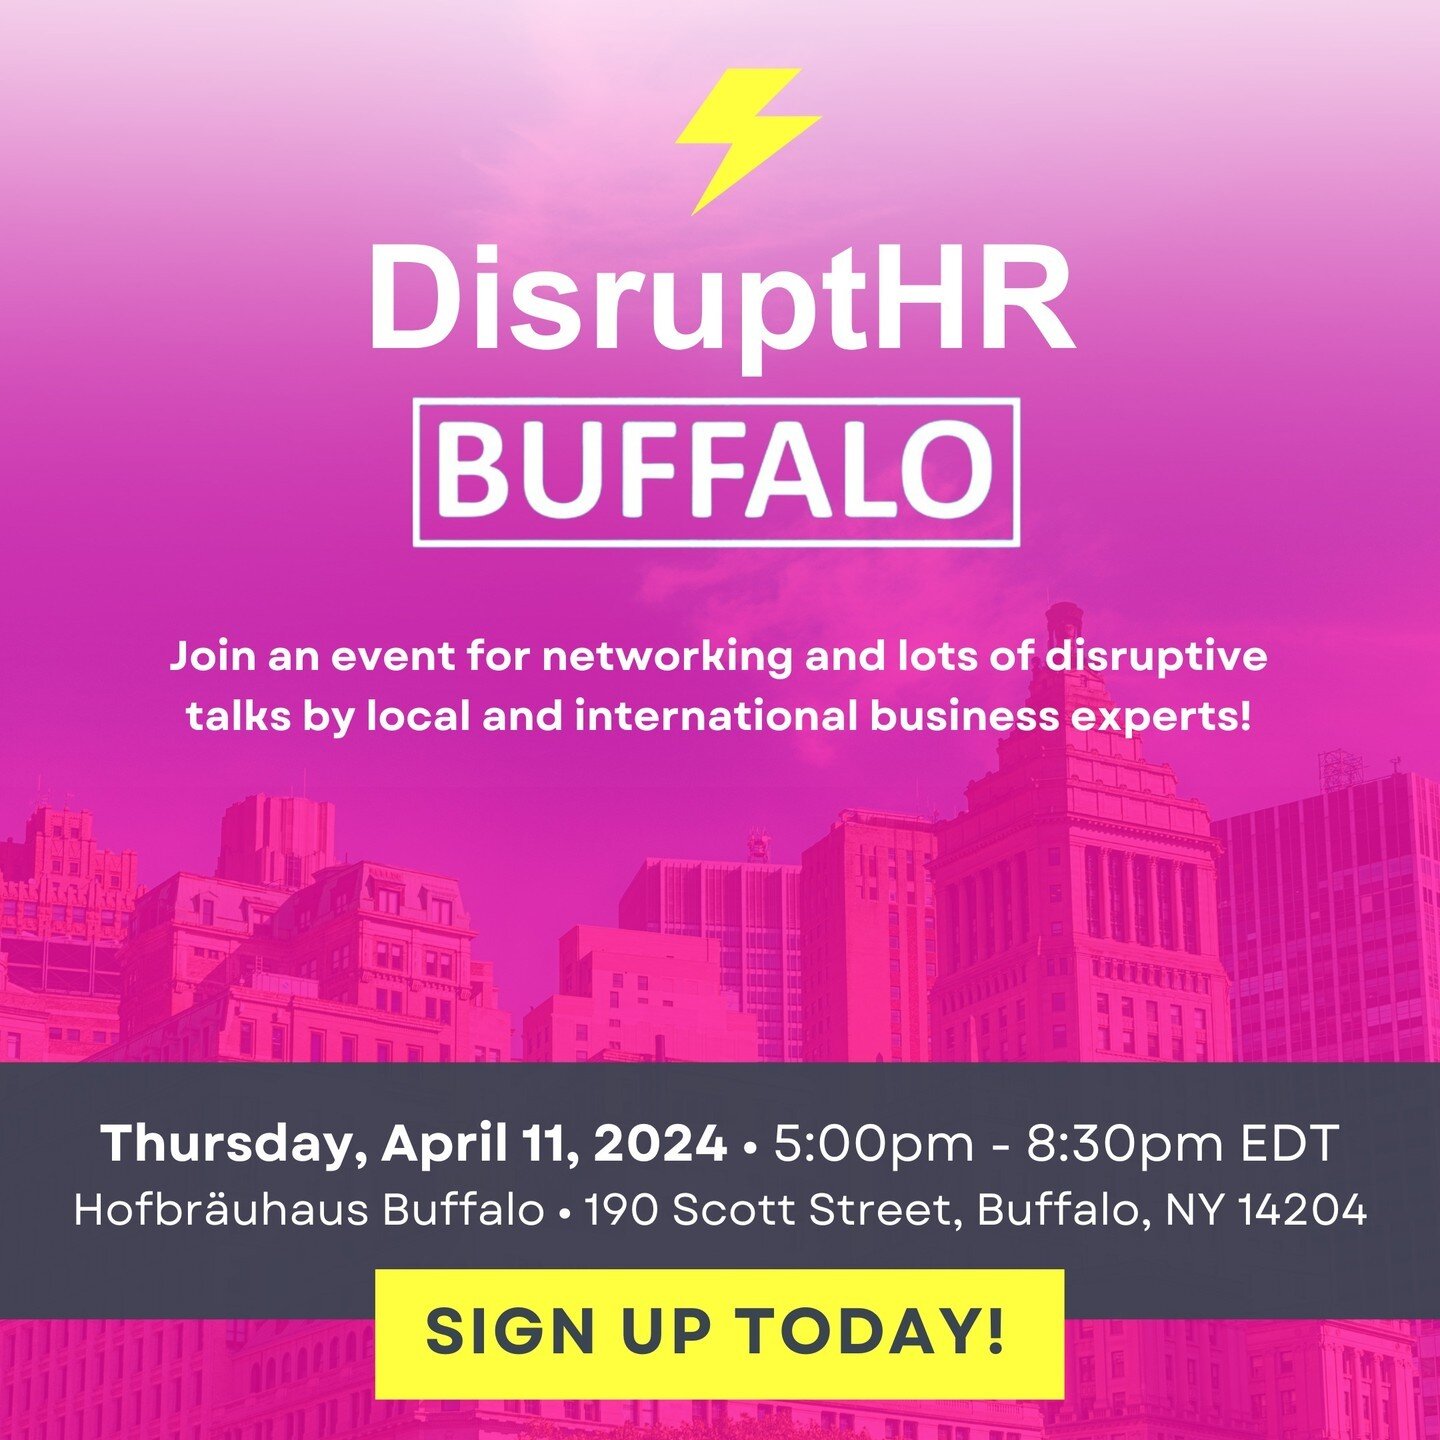 DisruptHR Buffalo is an event you don't want to miss! Network with peers, learn from local experts, and discover innovative approaches to improve the workplace! 

@DisruptHR 
Date: April 11, 2024 
Time: 5:00PM 
Location: Hofbr&auml;uhaus Buffalo 
Reg